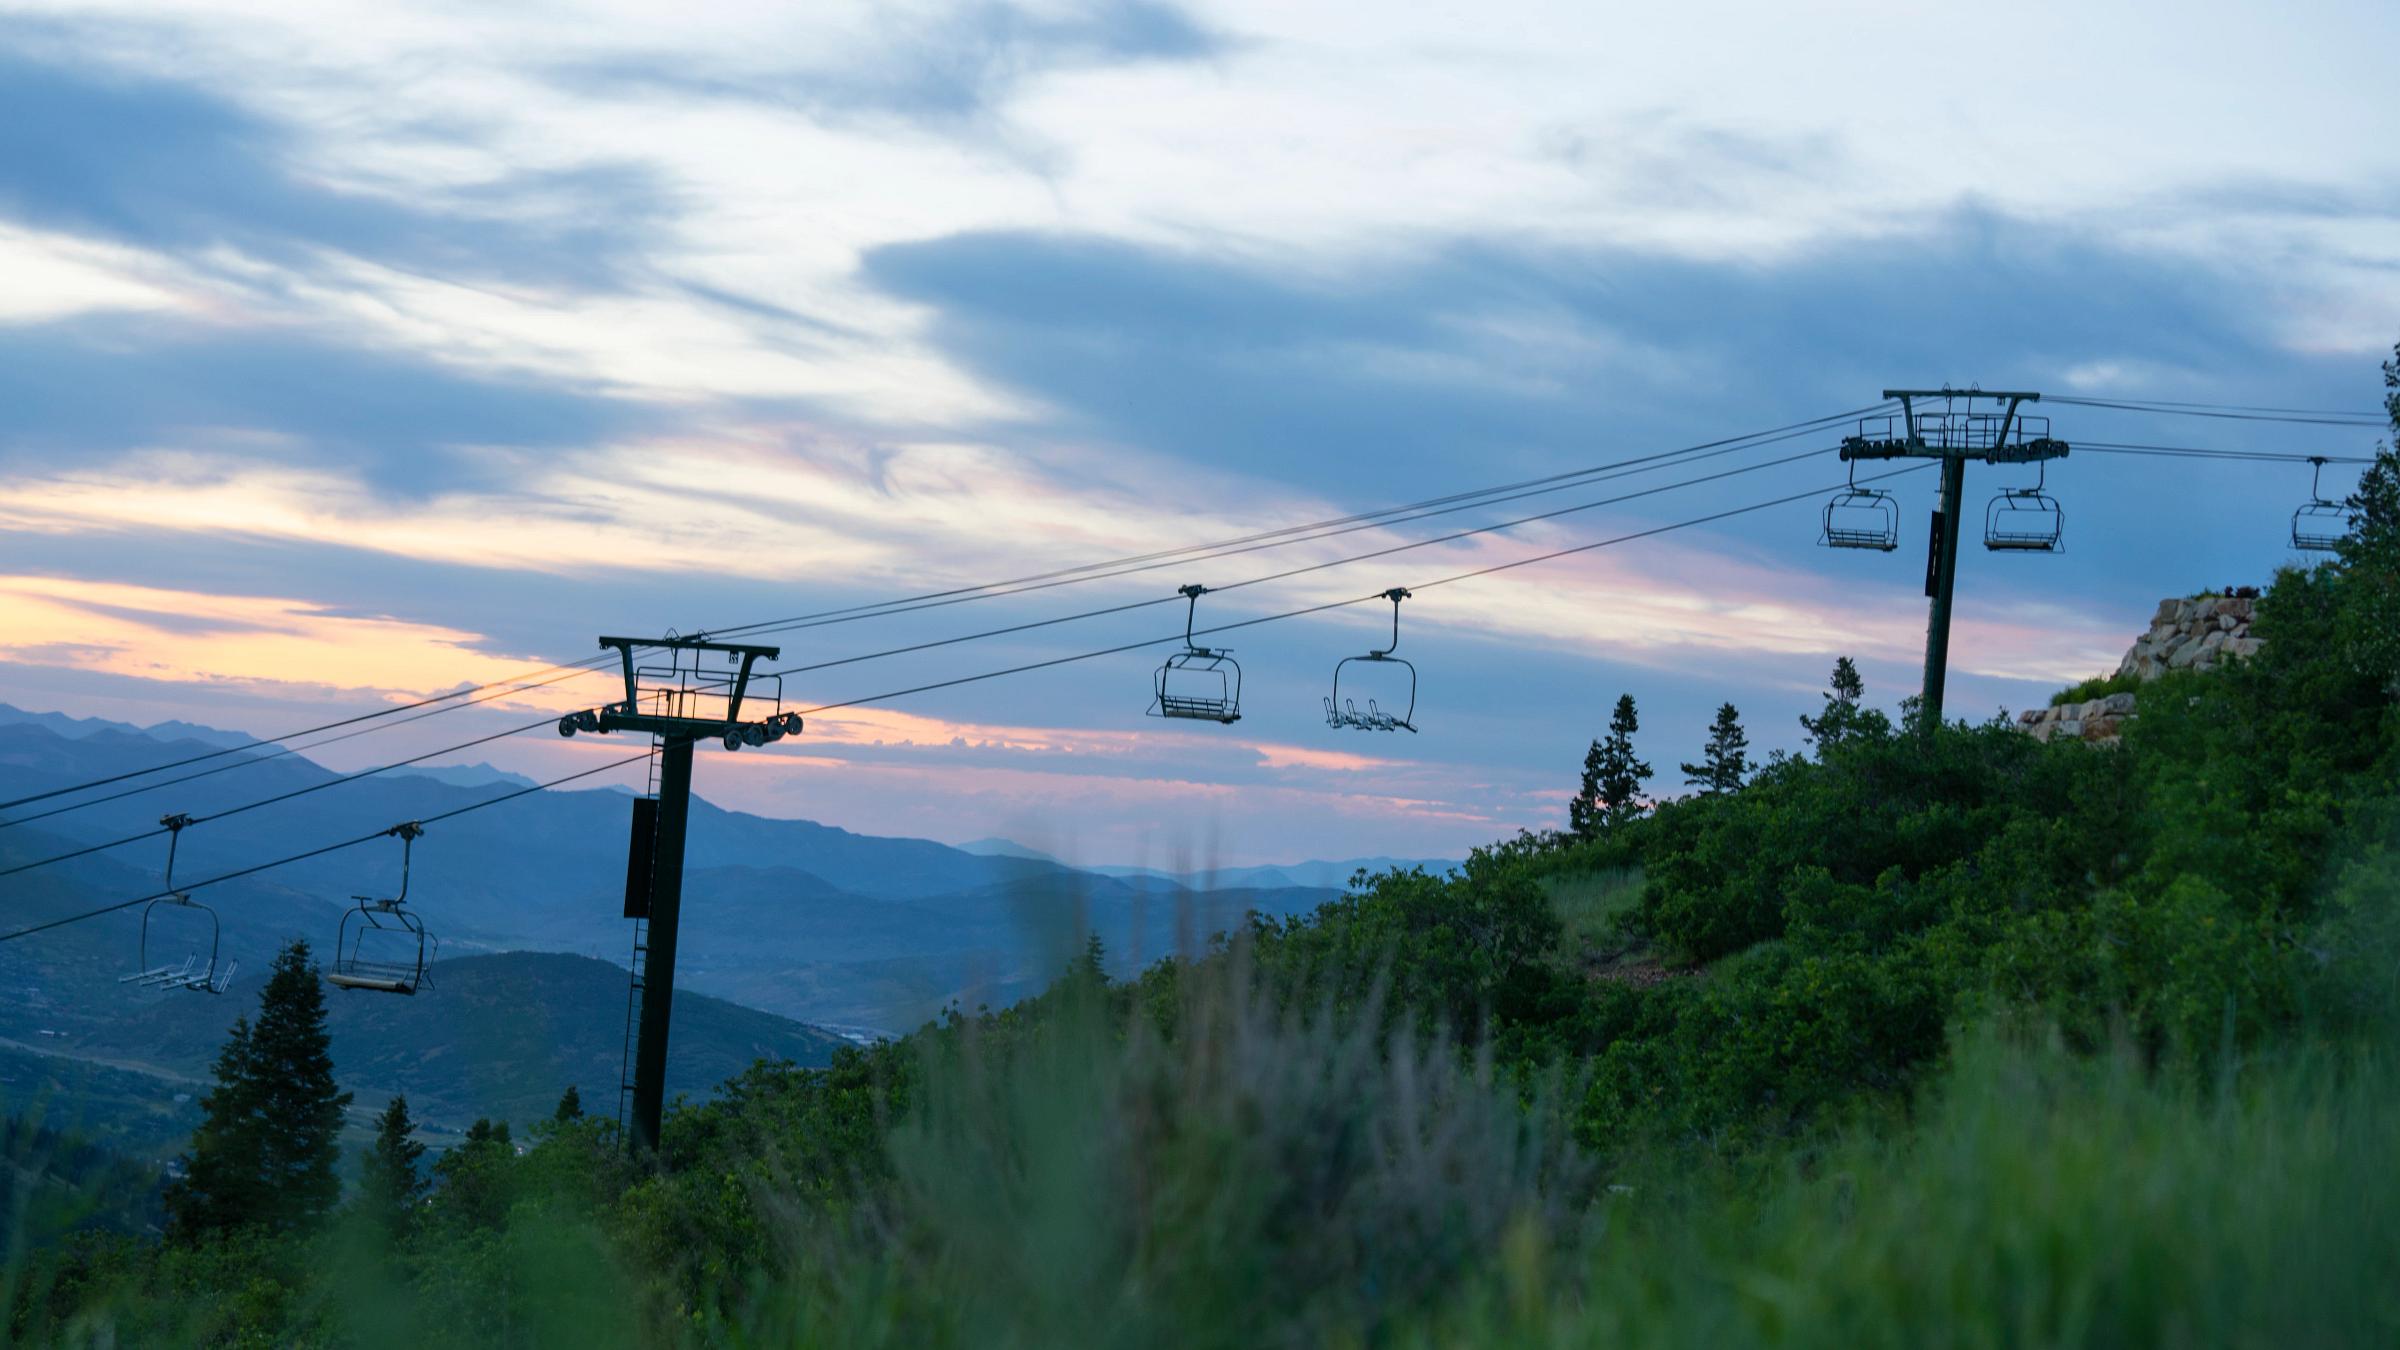 Chairlifts at dusk at Deer Valley Resort